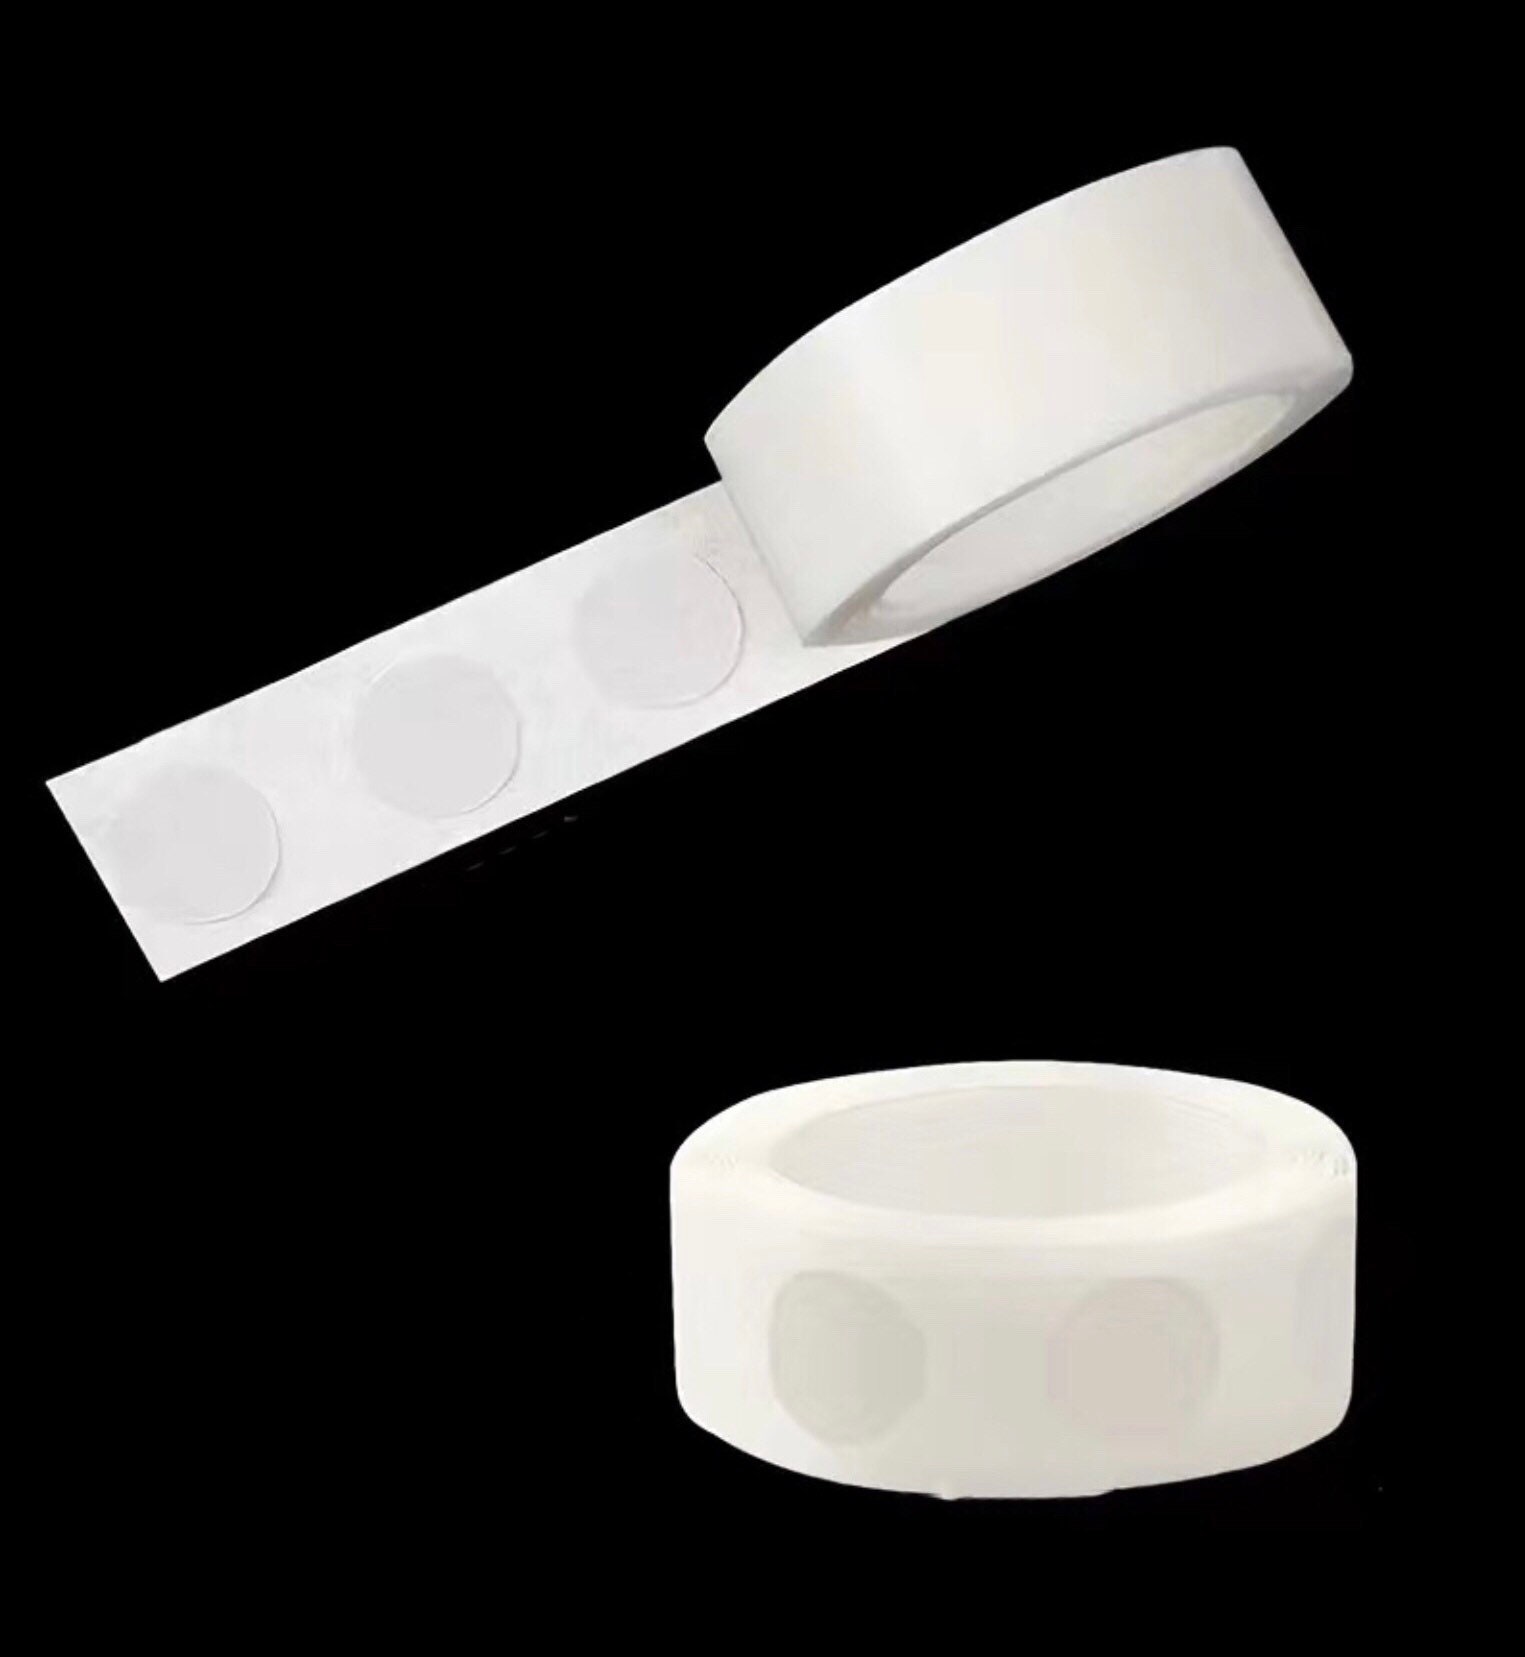 Glue Dot Tape for Balloon and Party Decoration (Pack of 5 Pcs)